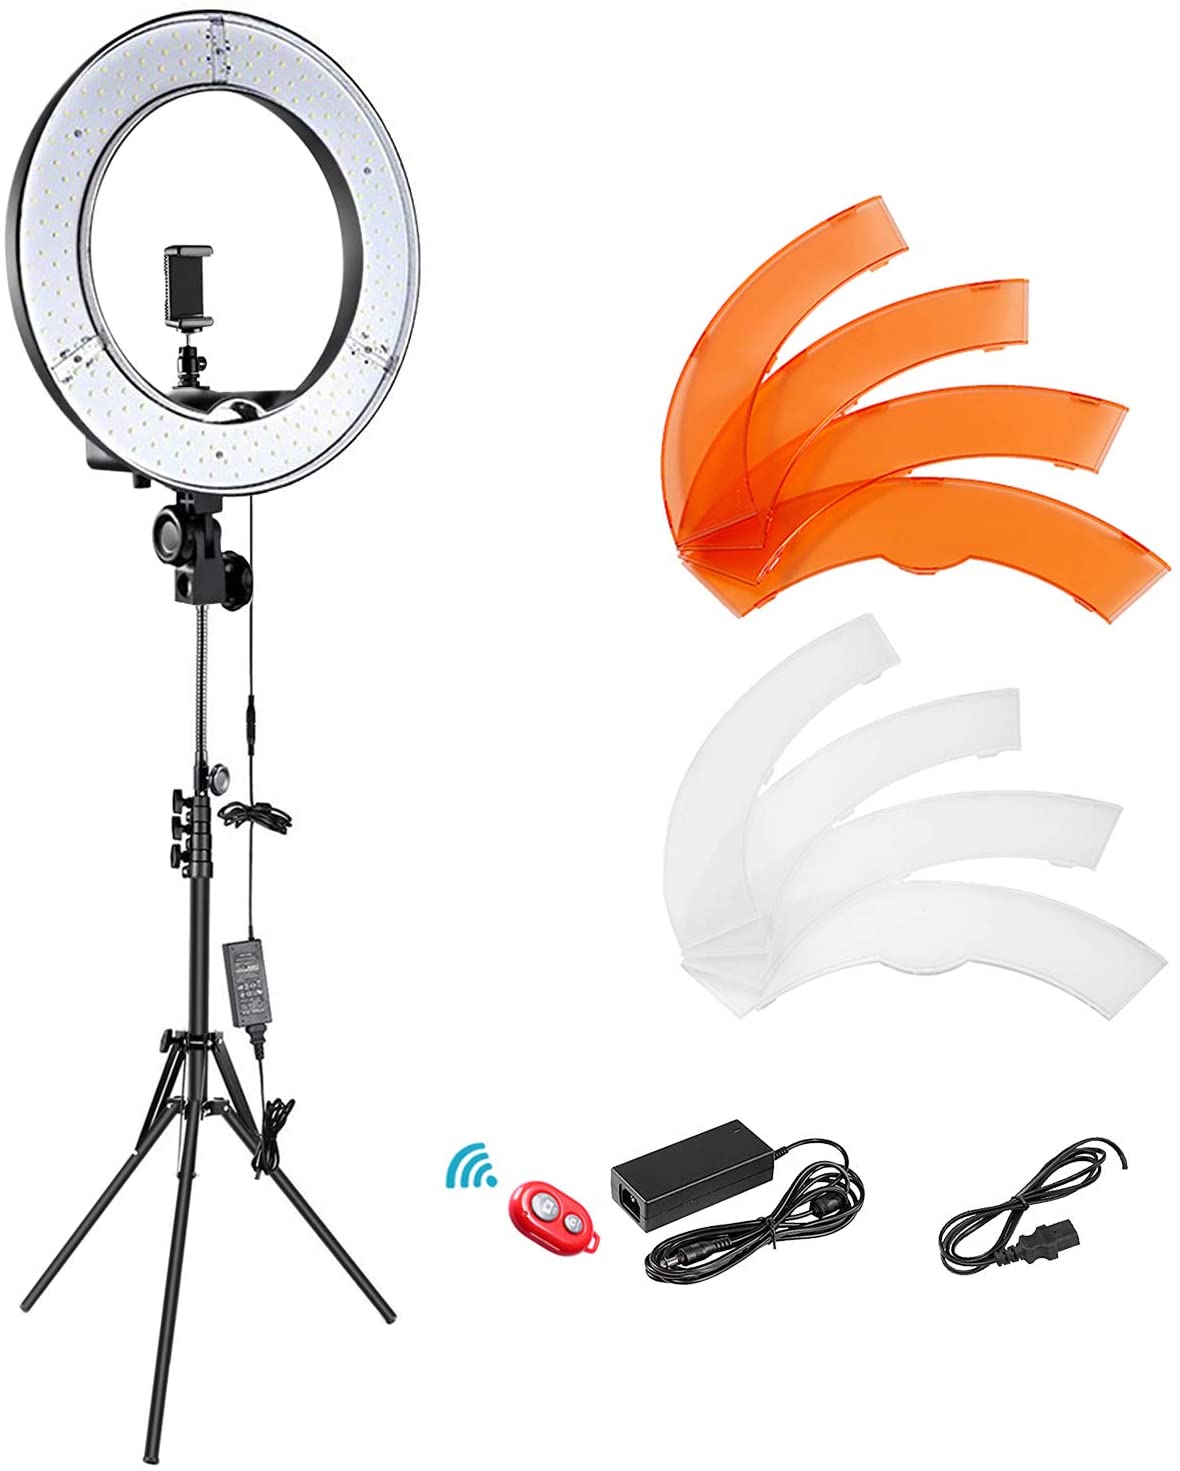 Neewer 12-inch Inner/14-inch Outer LED Ring Light and Light Stand 36W 5500K Lighting Kit with Soft Tube,Color Filter,Hot Shoe Adapter,Bluetooth Receiver for Camera Smartphone